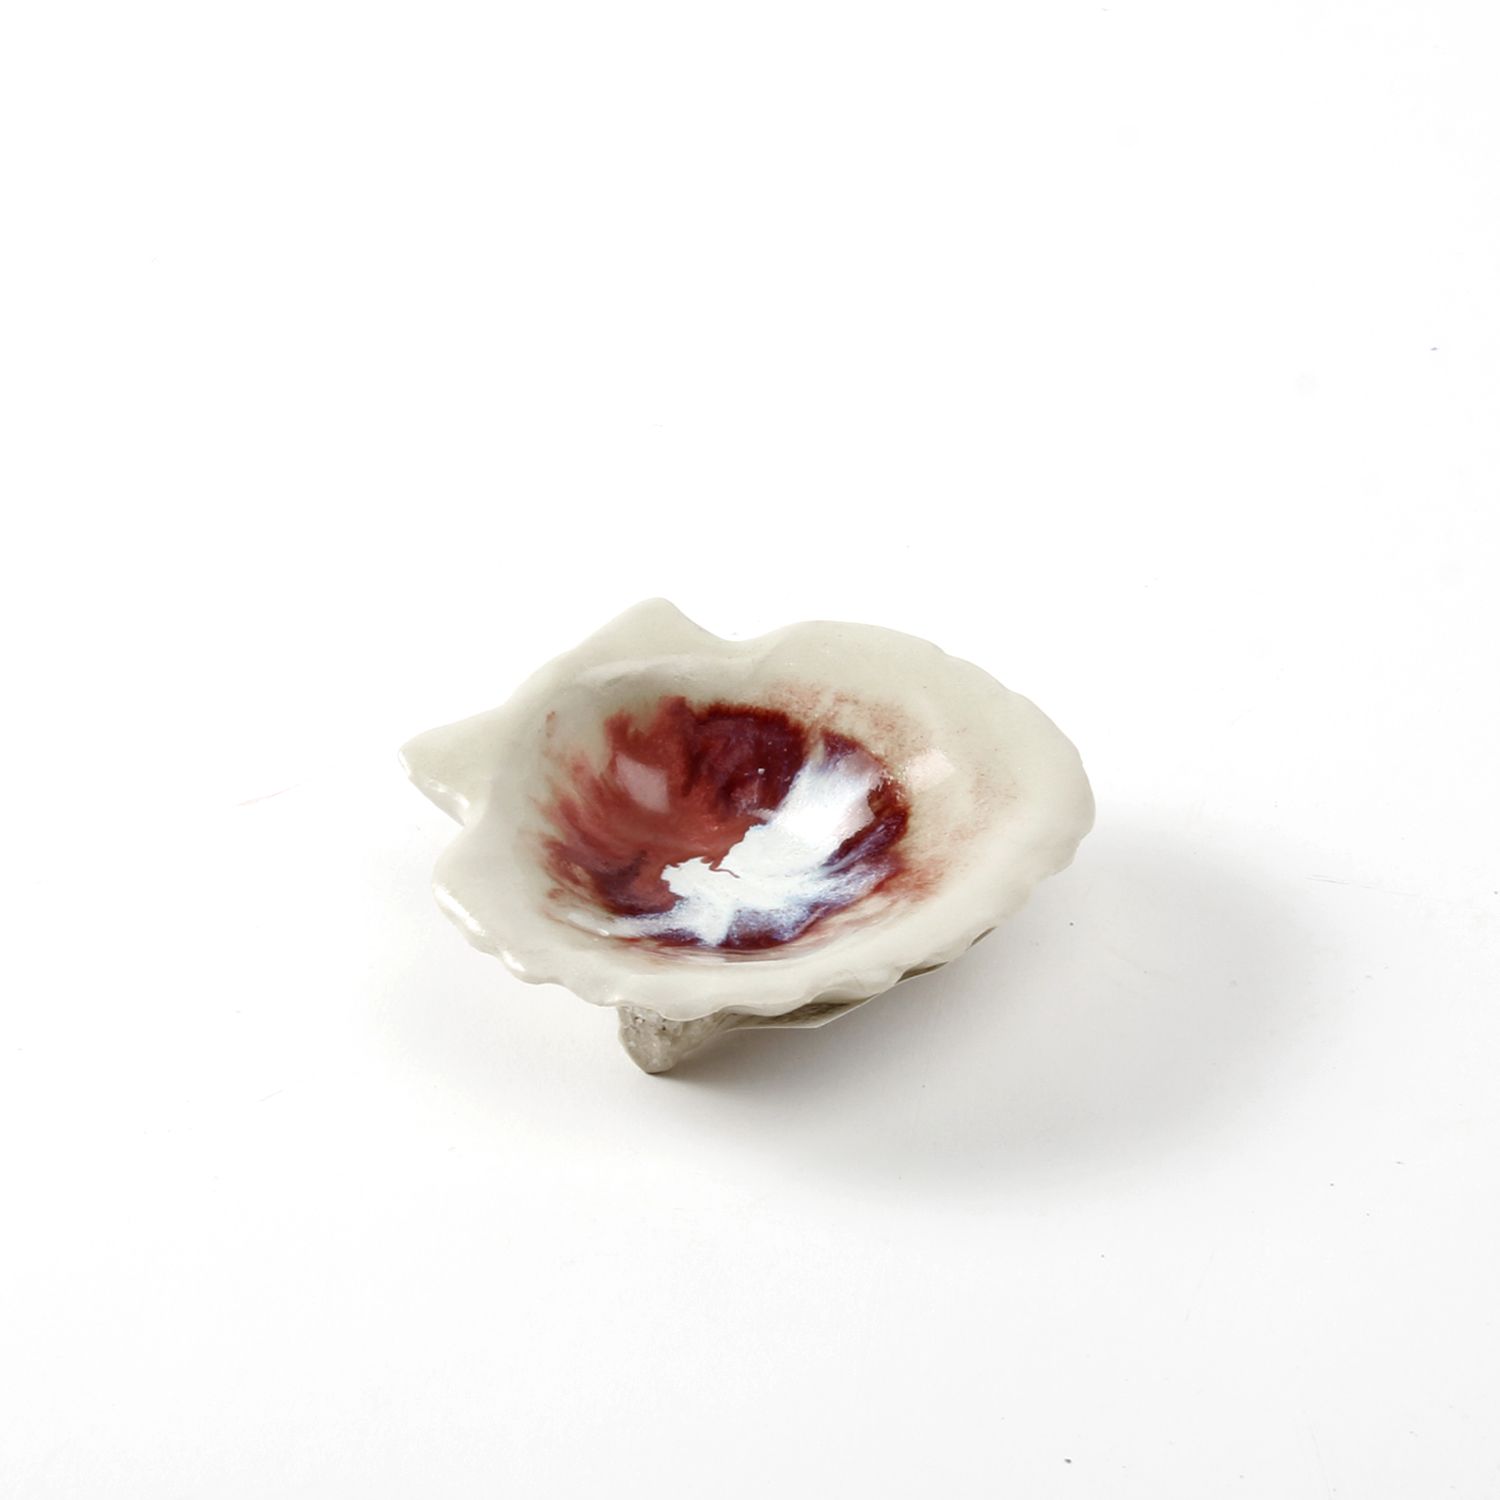 Brenda Nieves: Small Clam Plate Product Image 4 of 4